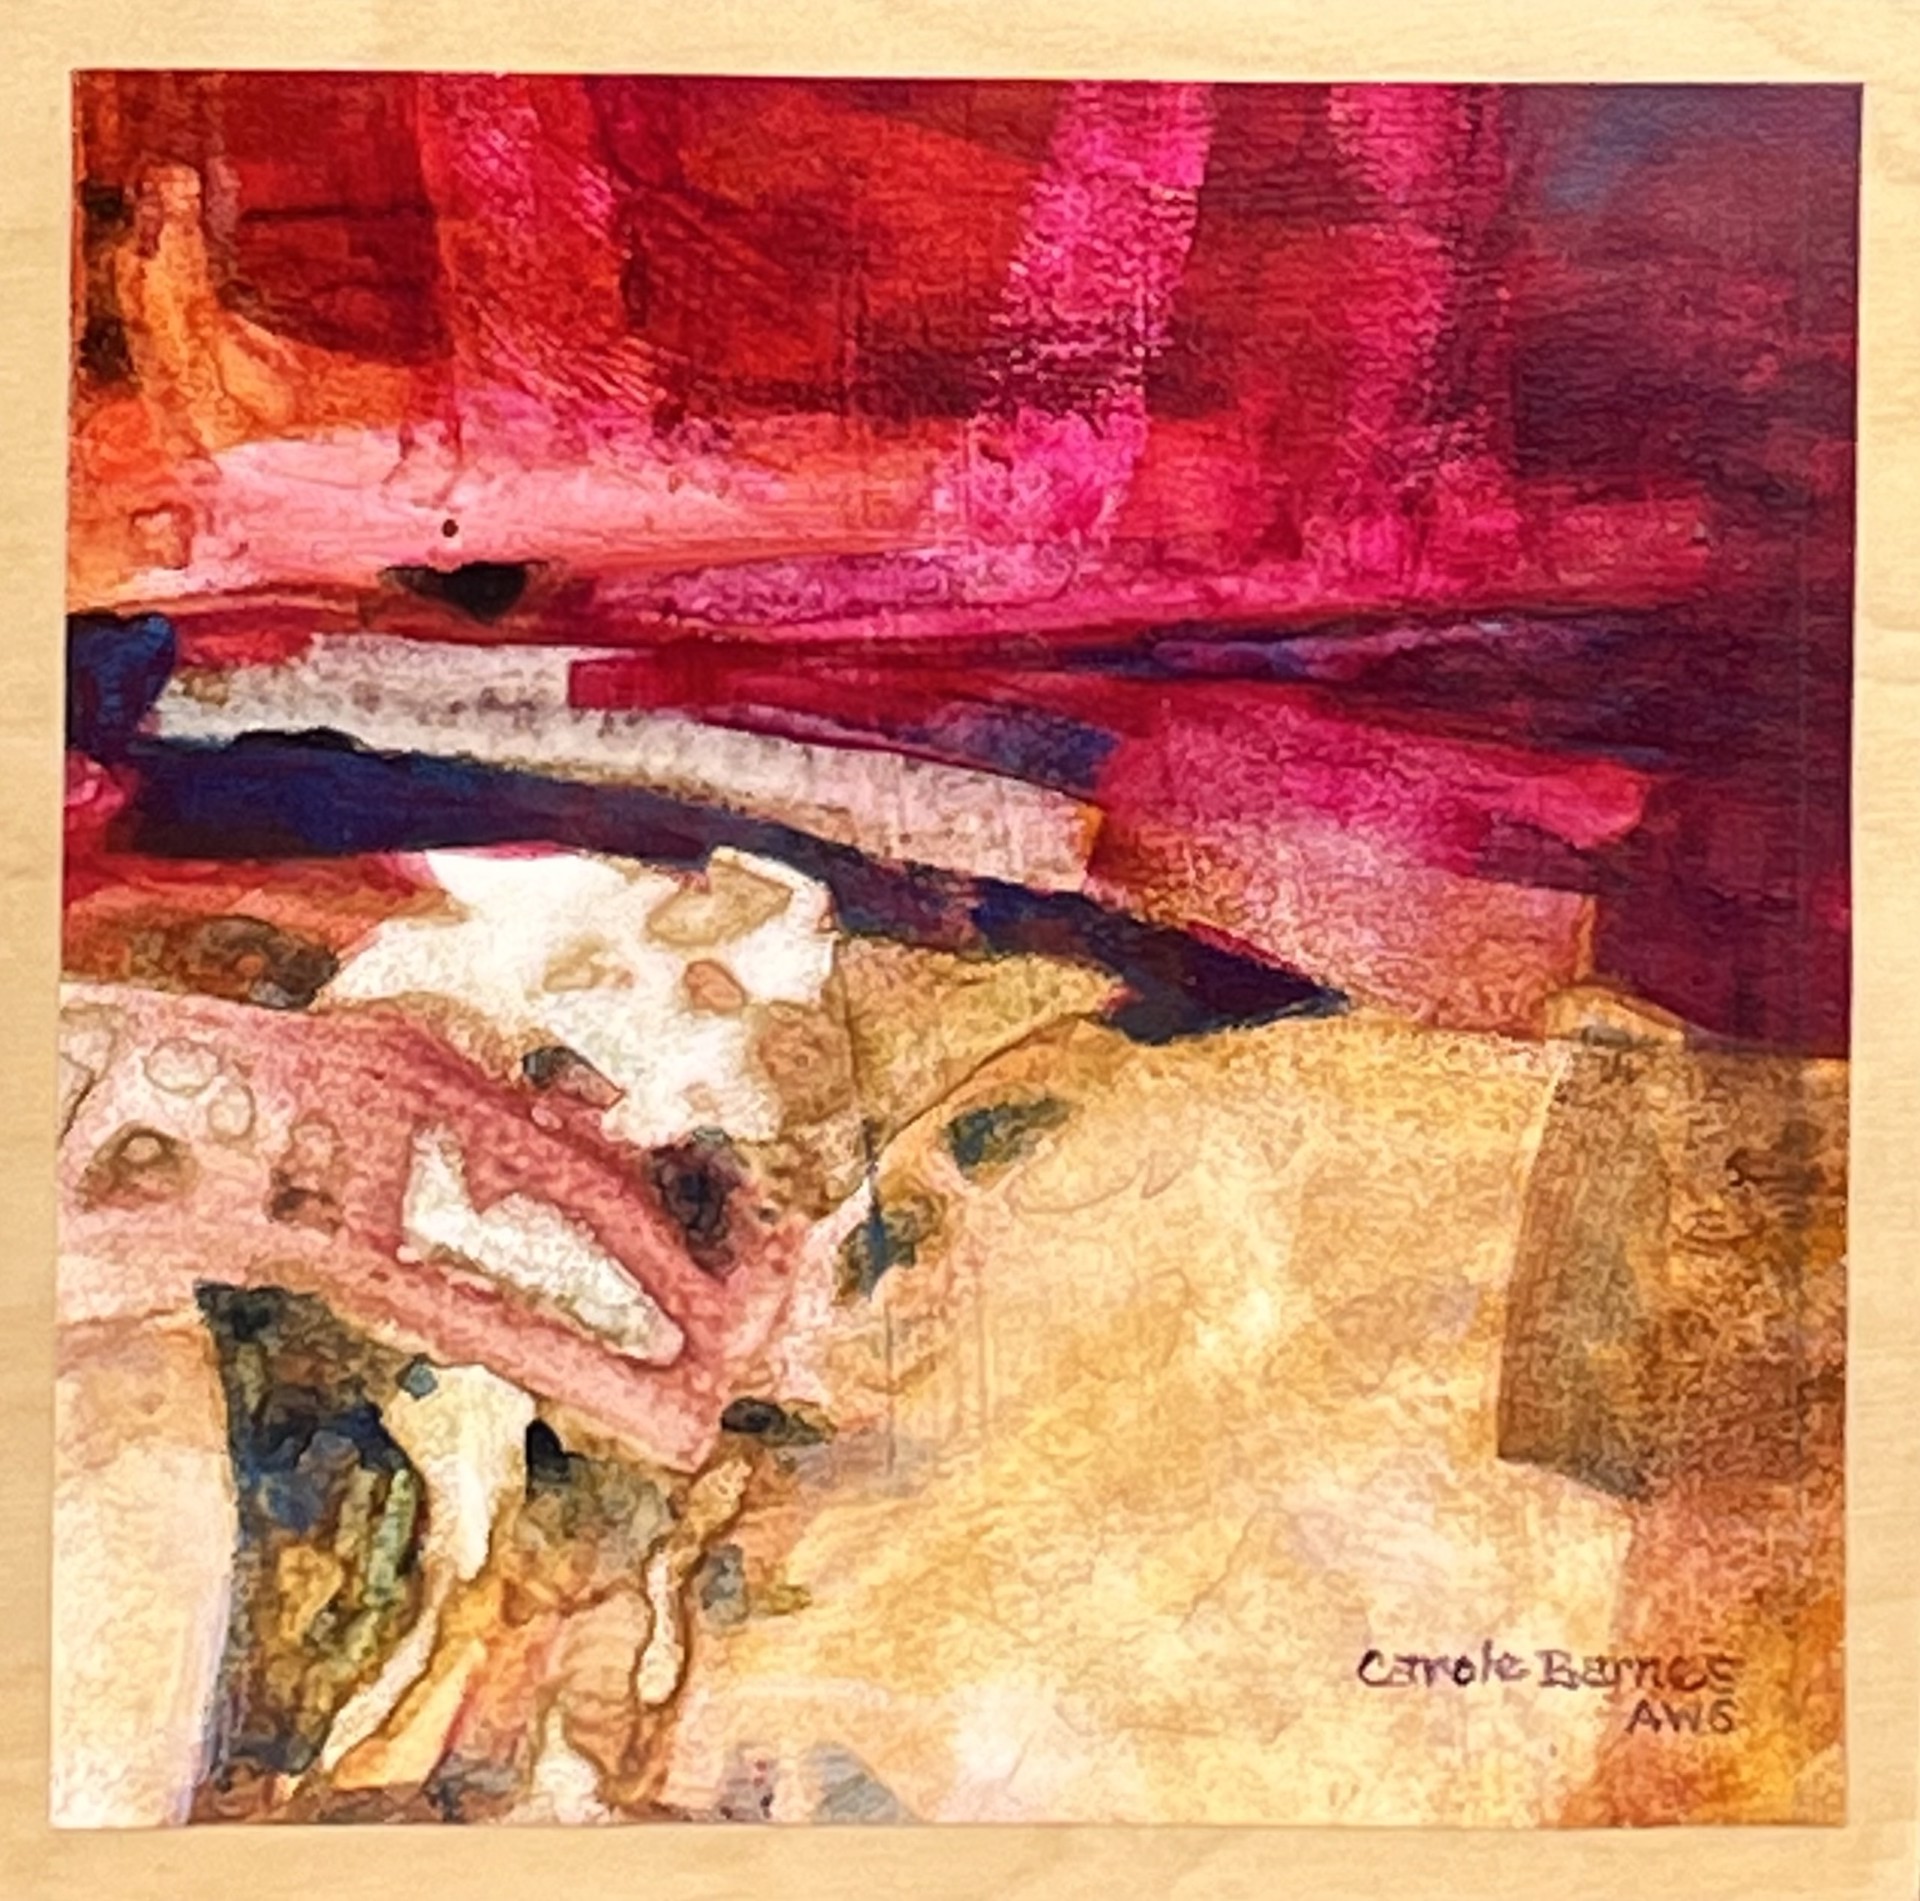 Red Landscape #20 by Carole Barnes